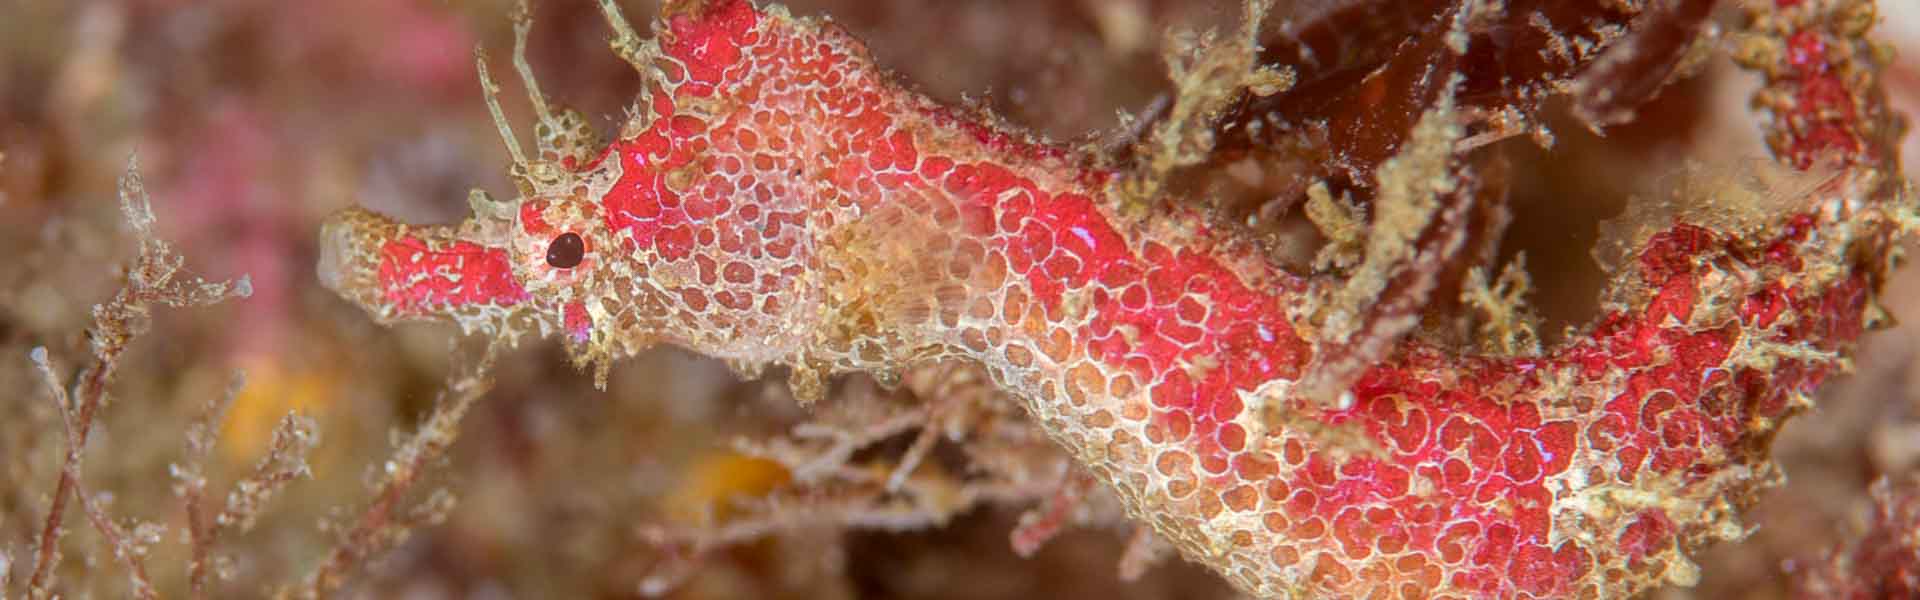 The Hairy Pygmy Pipehorse